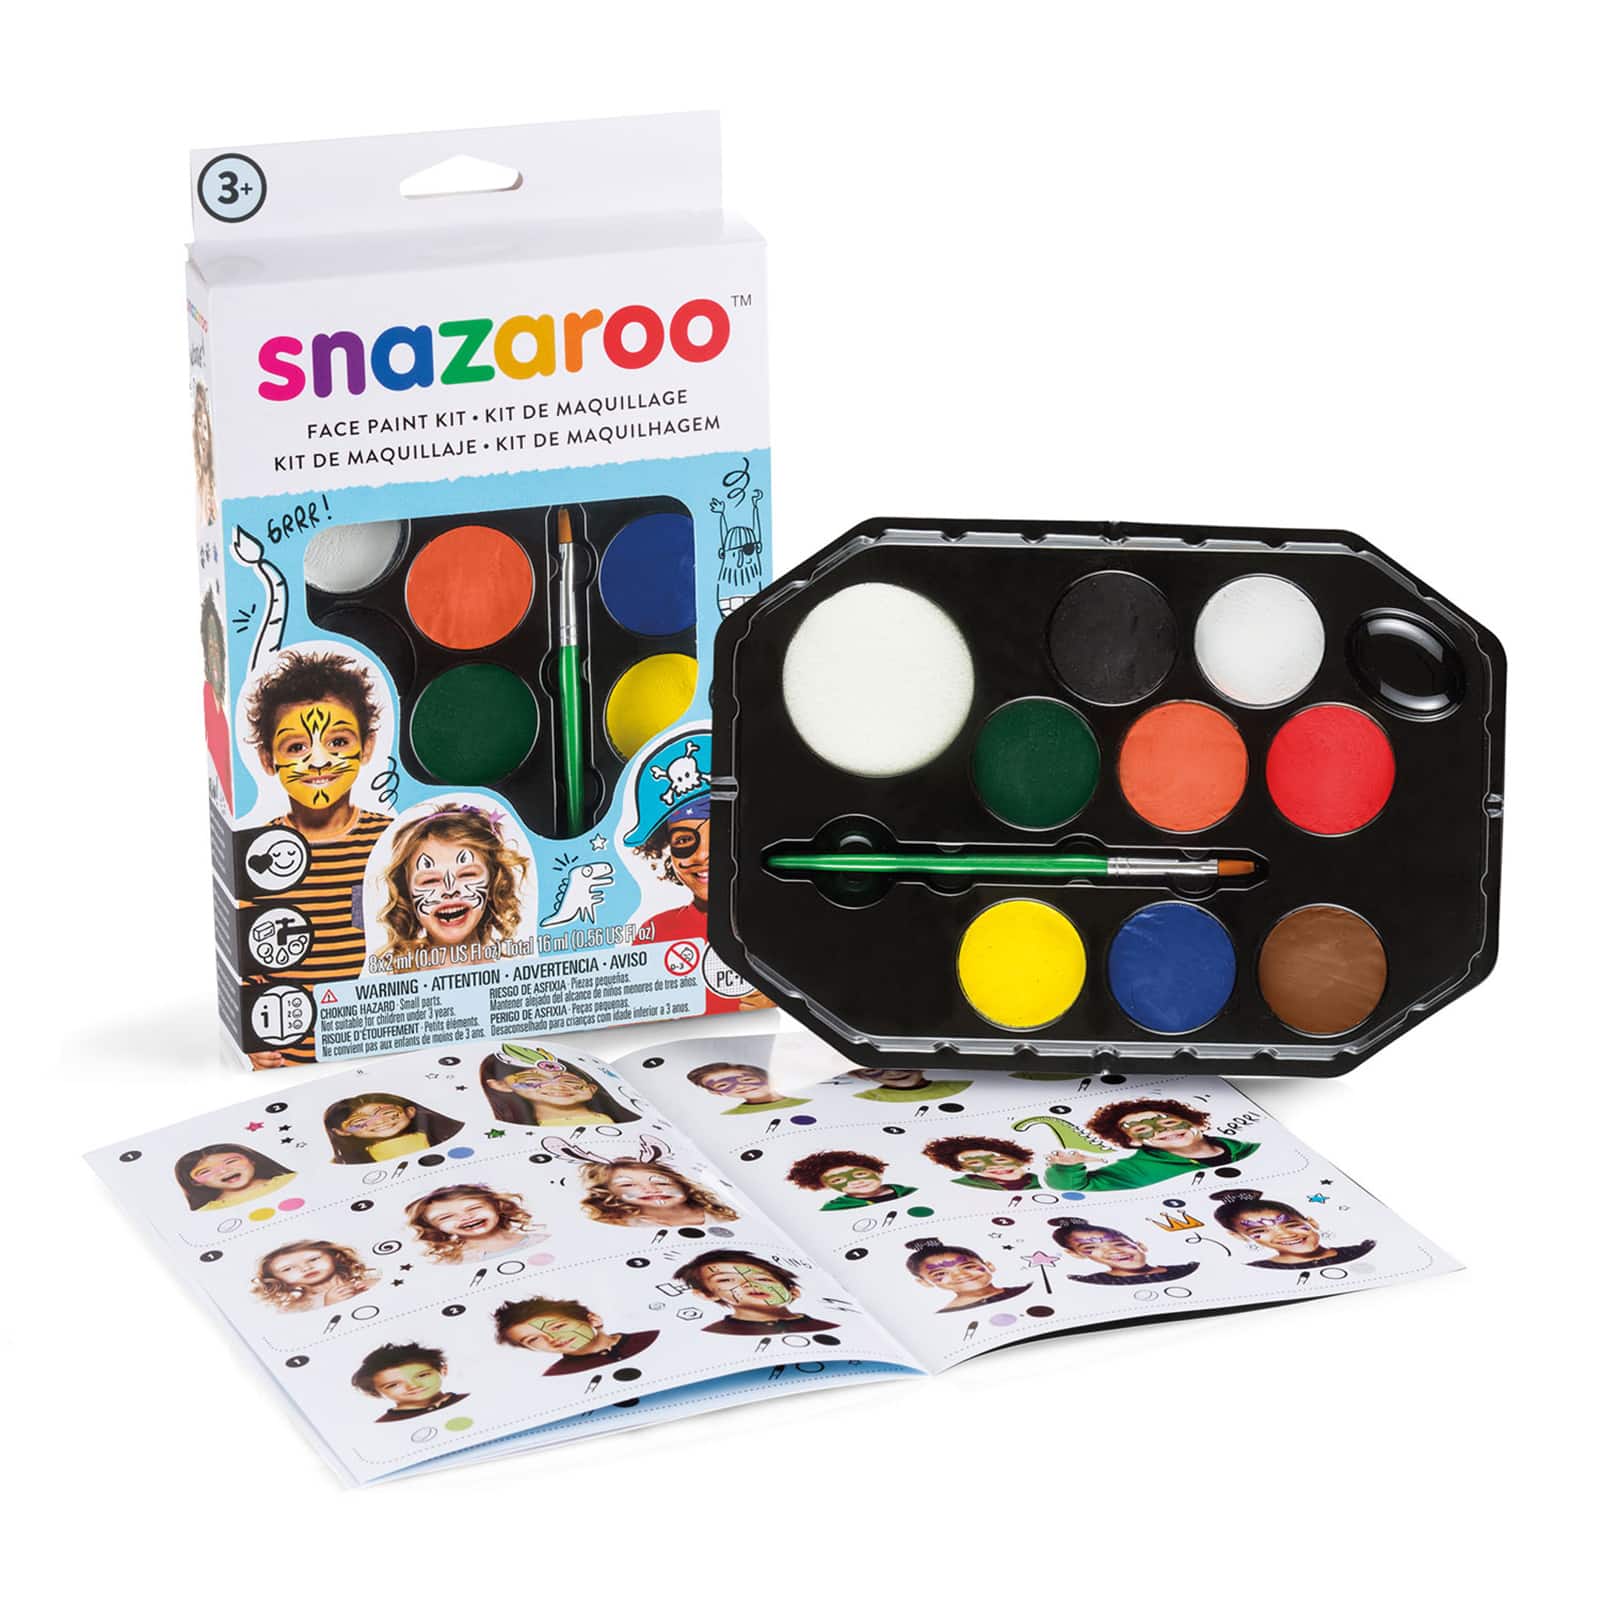 Review: Snazaroo Mini Theme Face Paint Packs with Weekend Box